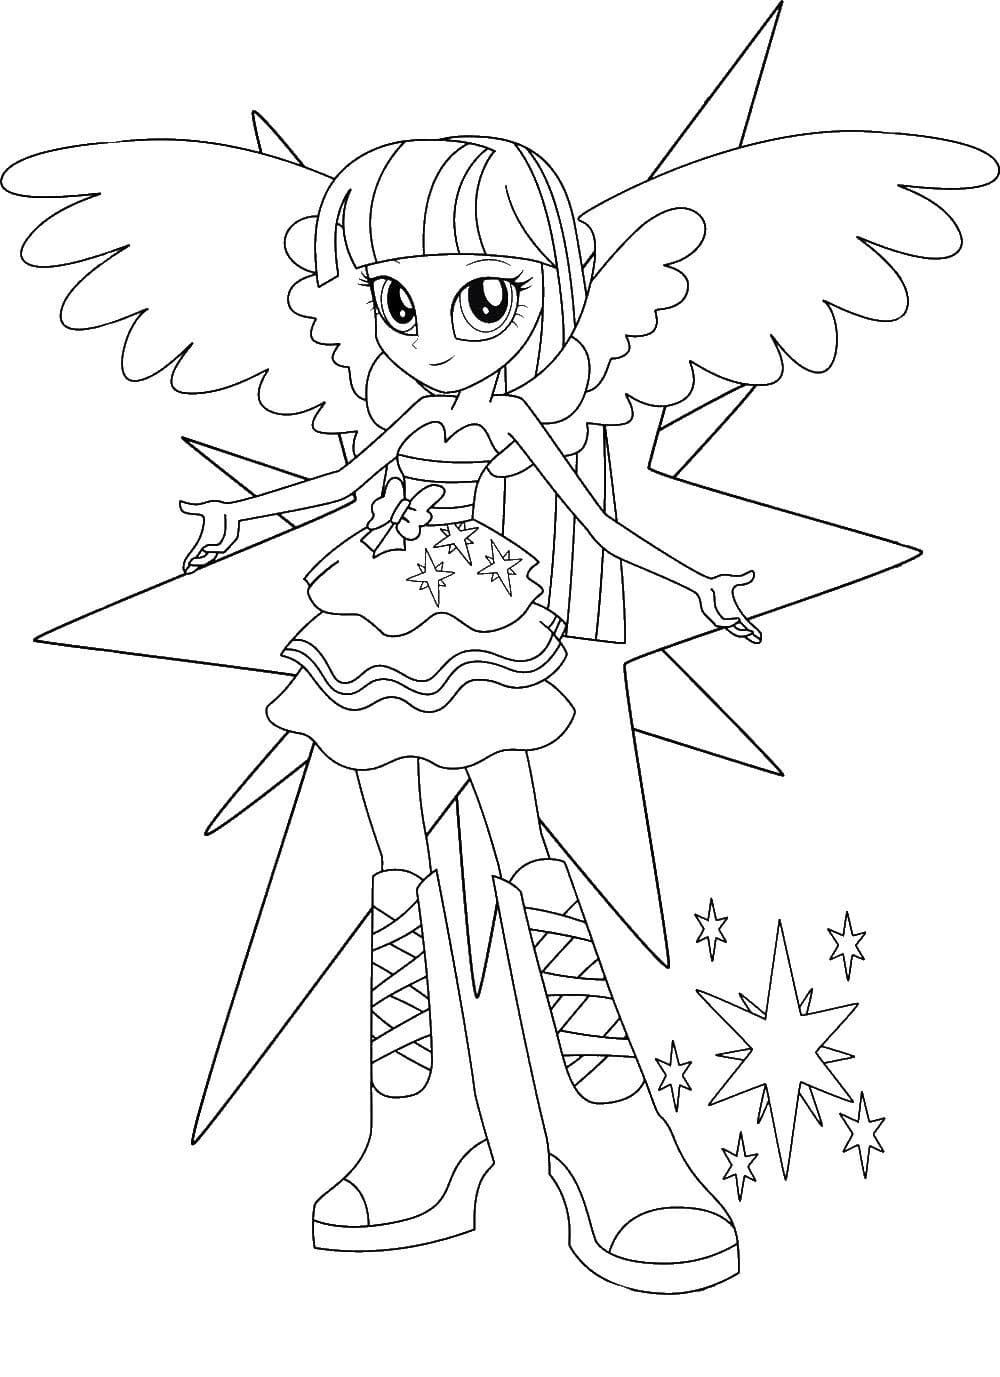 Coloring pages Equestria Girls. 20 Coloring Pages for Printing